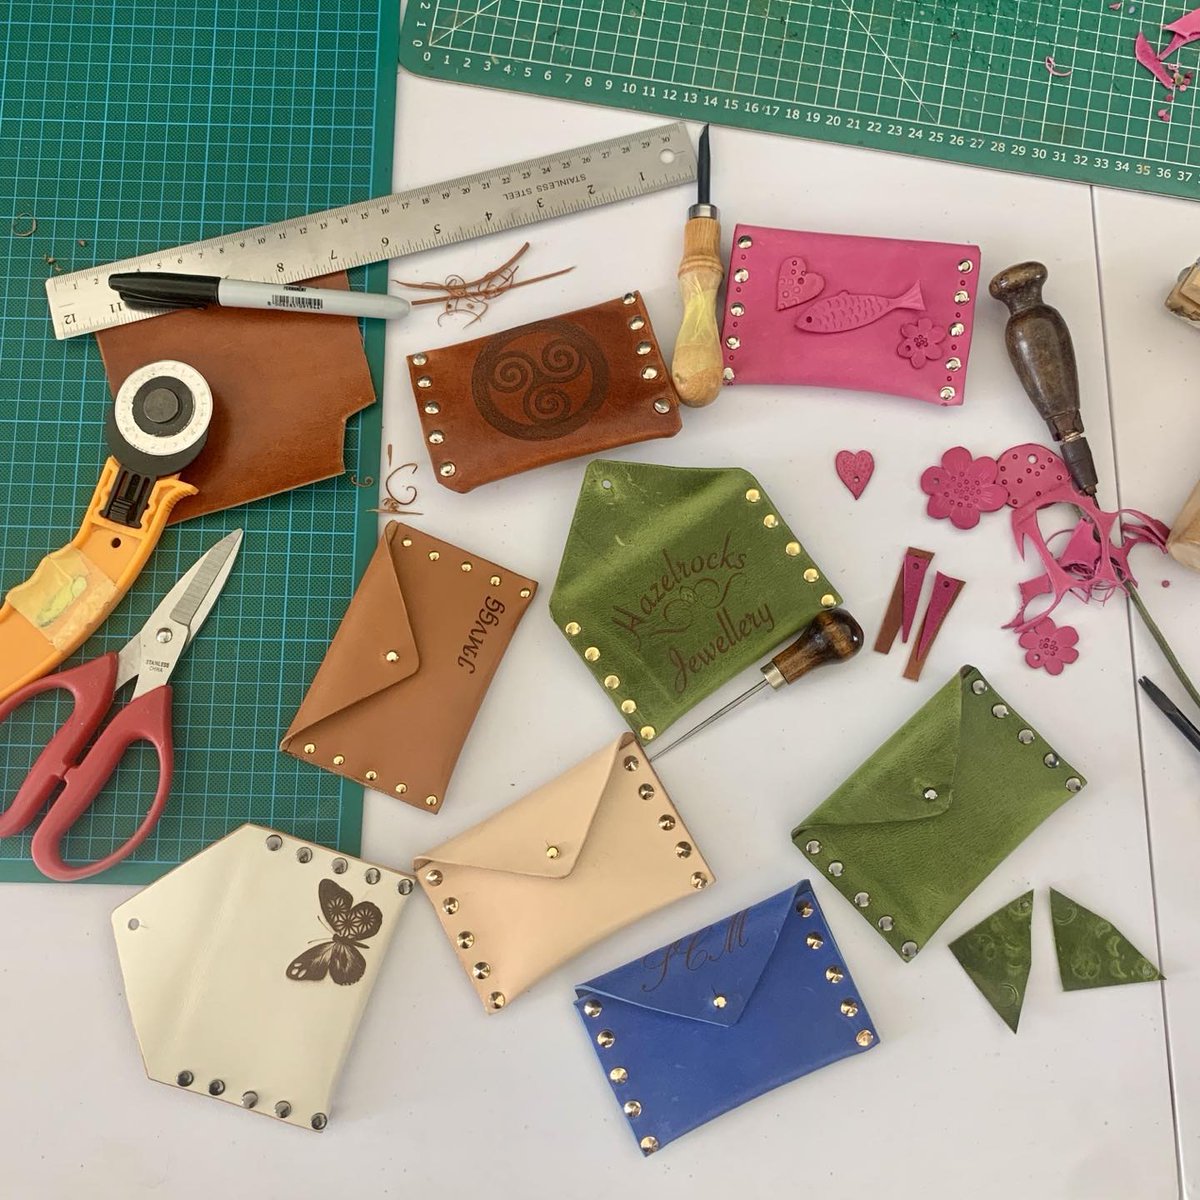 Some of the fab work this morning on our Leather making workshop with @UnaBurkeLeather in King House, Roscommon. Beautiful laser engraved designs on these handmade coin purses.